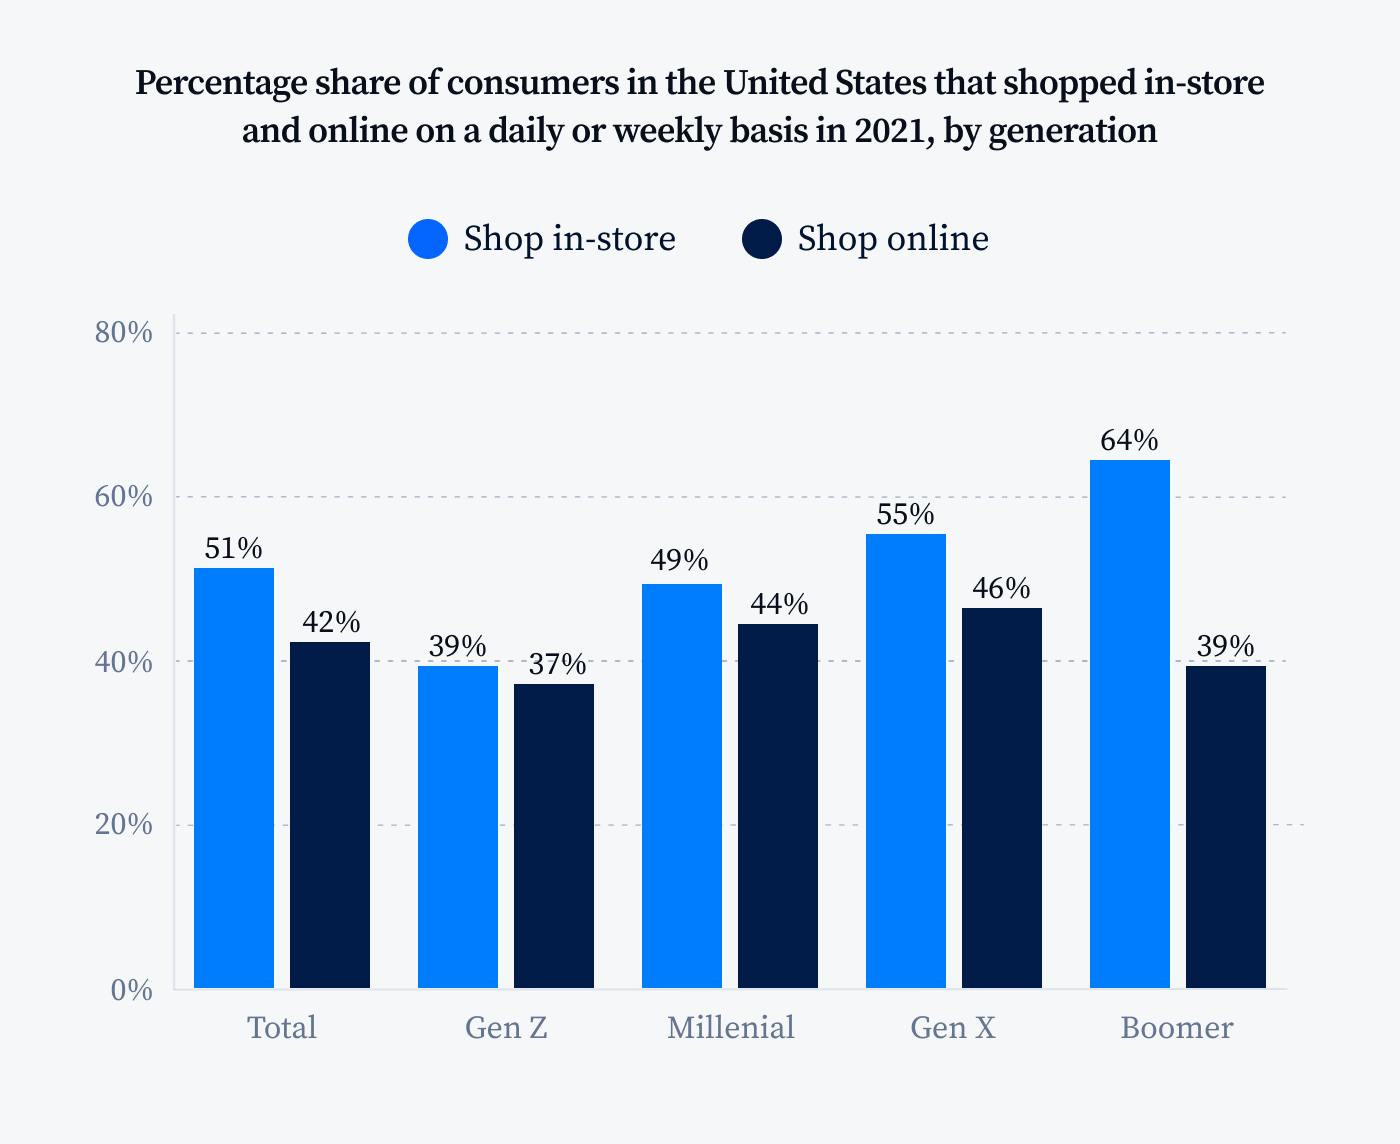 percentage share of consumers in the US that shopped in-store and online on a daily or weekly basis in 2021